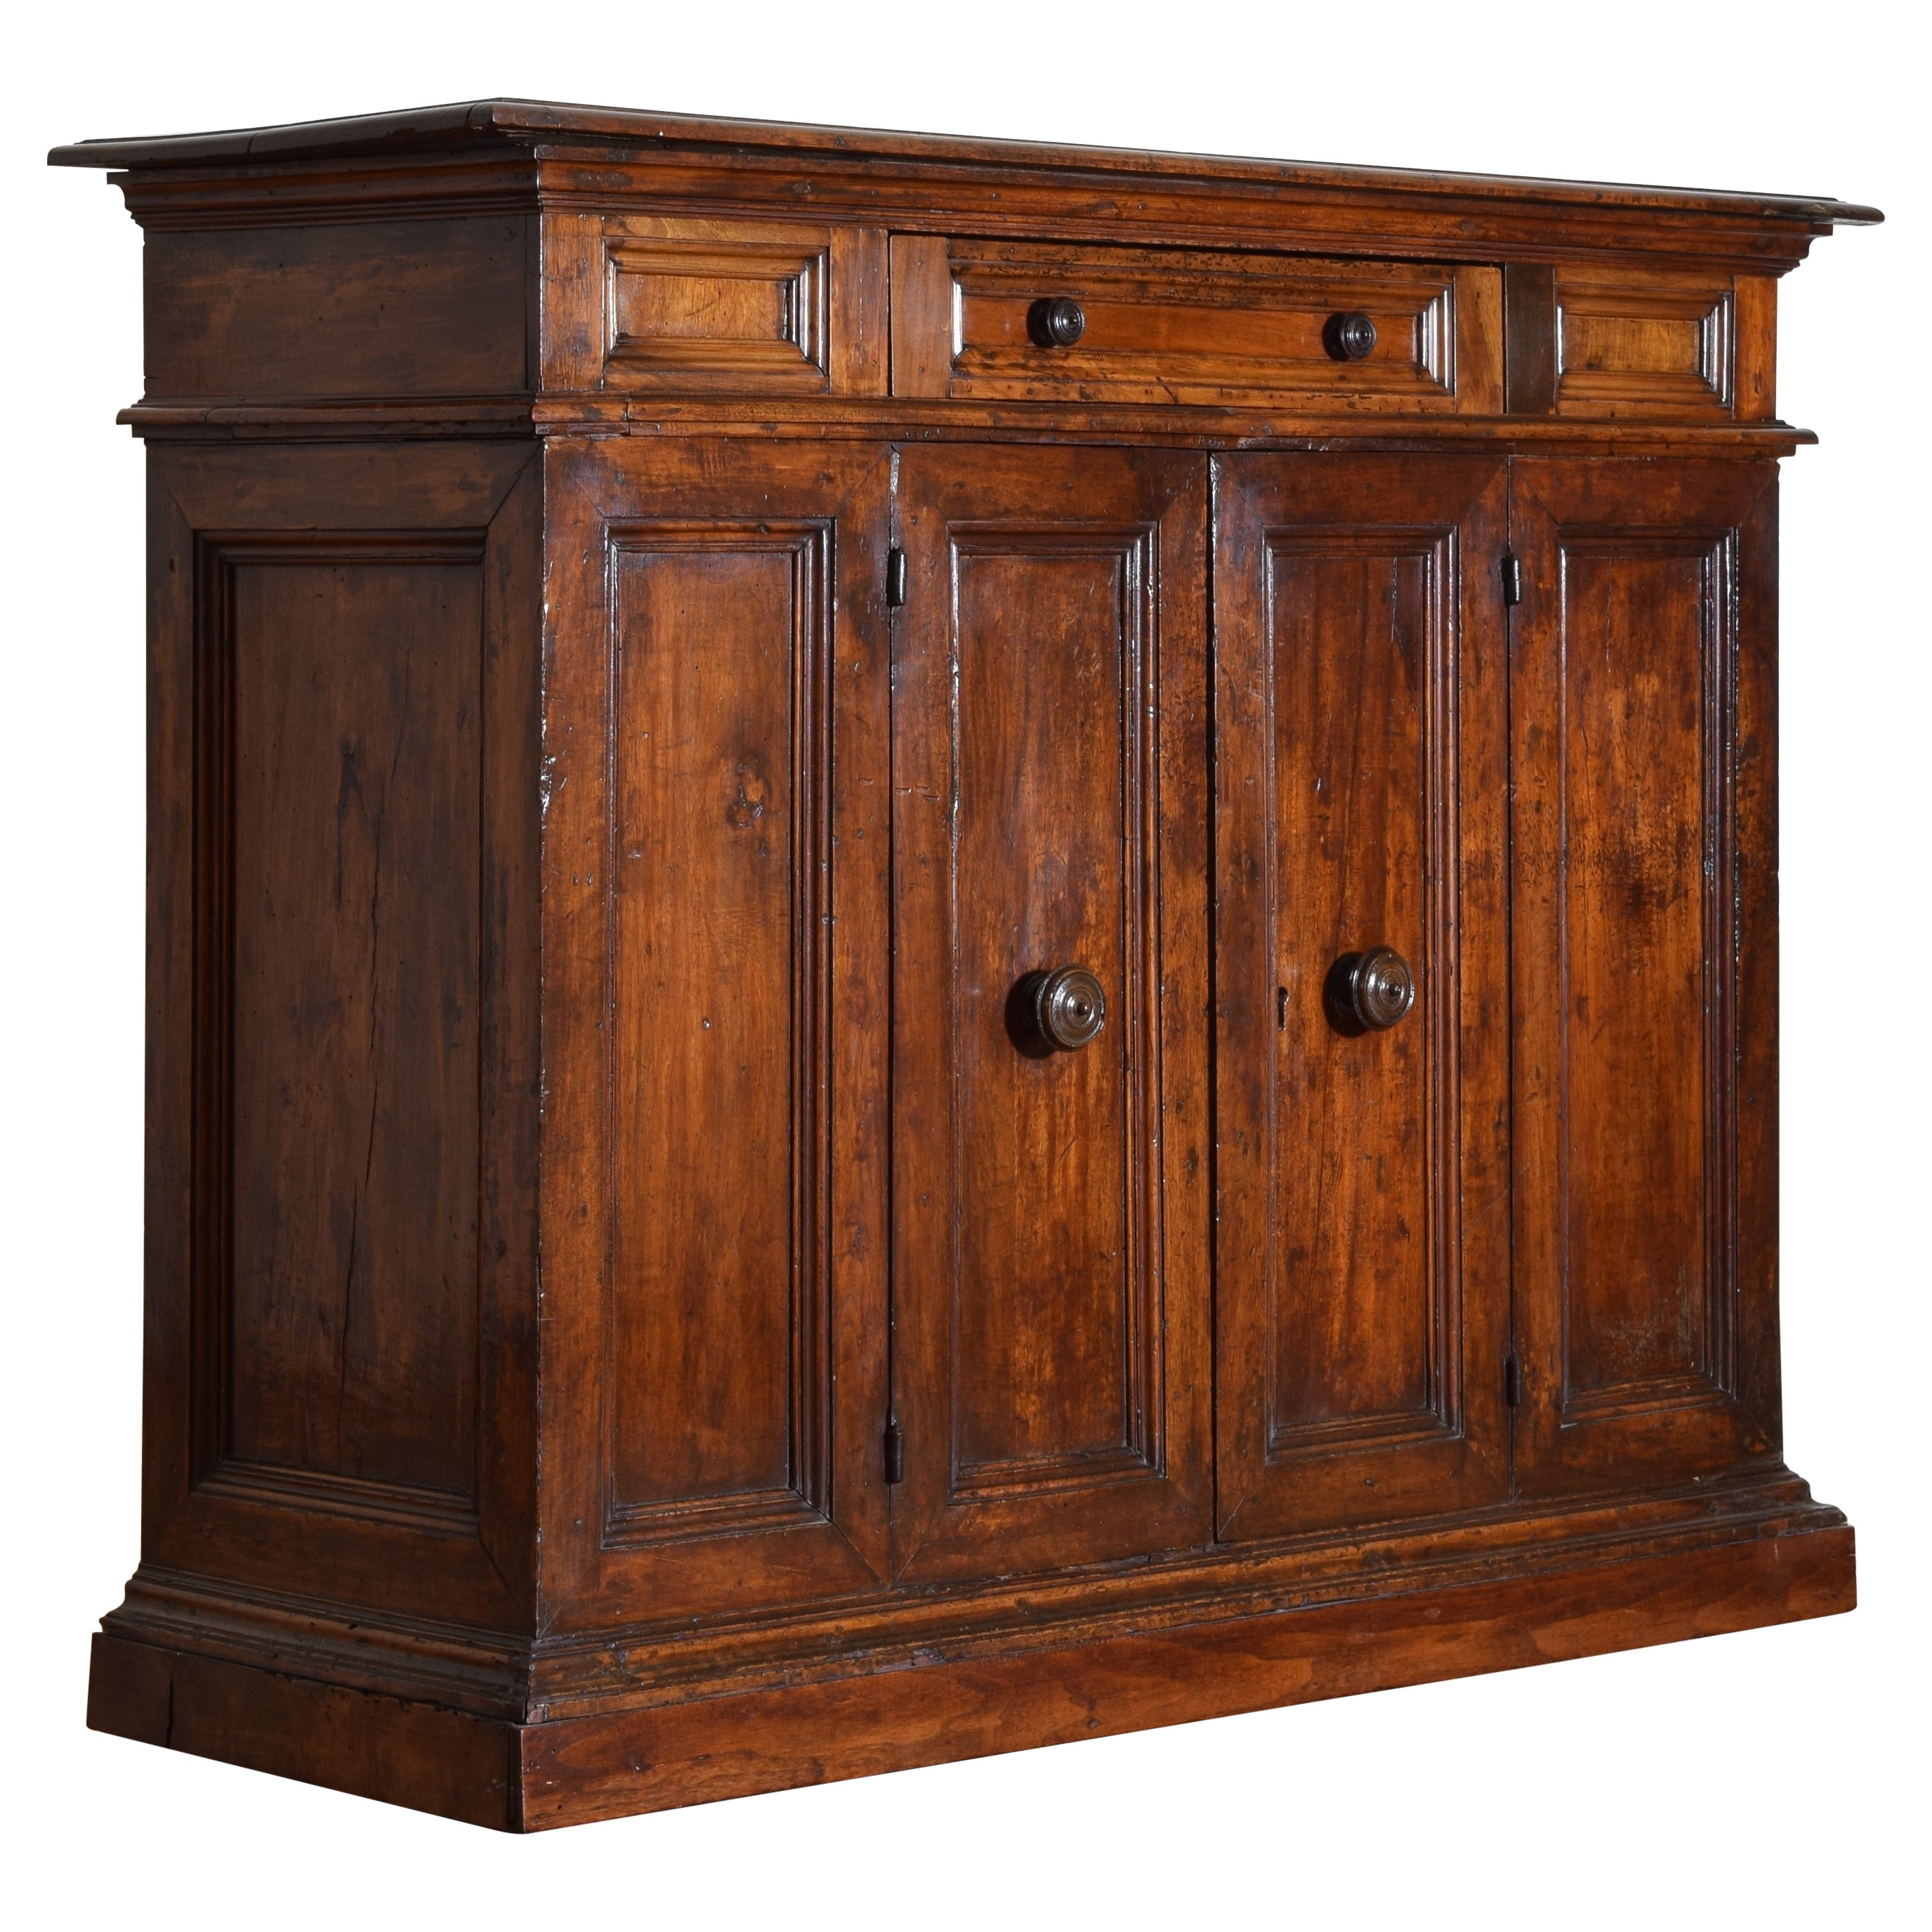 Early 1700s Case Pieces and Storage Cabinets